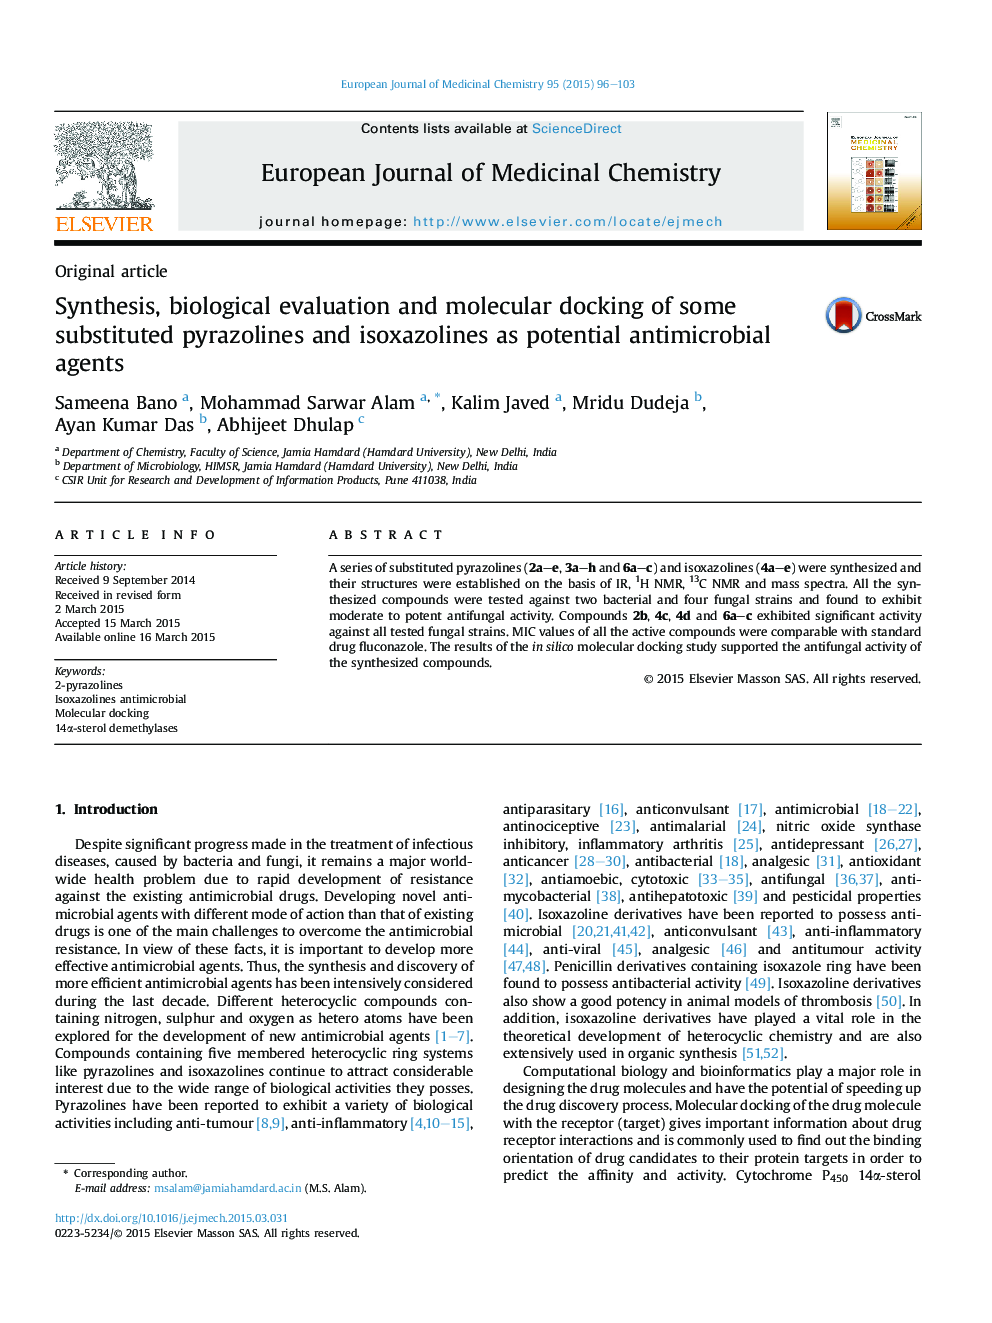 Synthesis, biological evaluation and molecular docking of some substituted pyrazolines and isoxazolines as potential antimicrobial agents